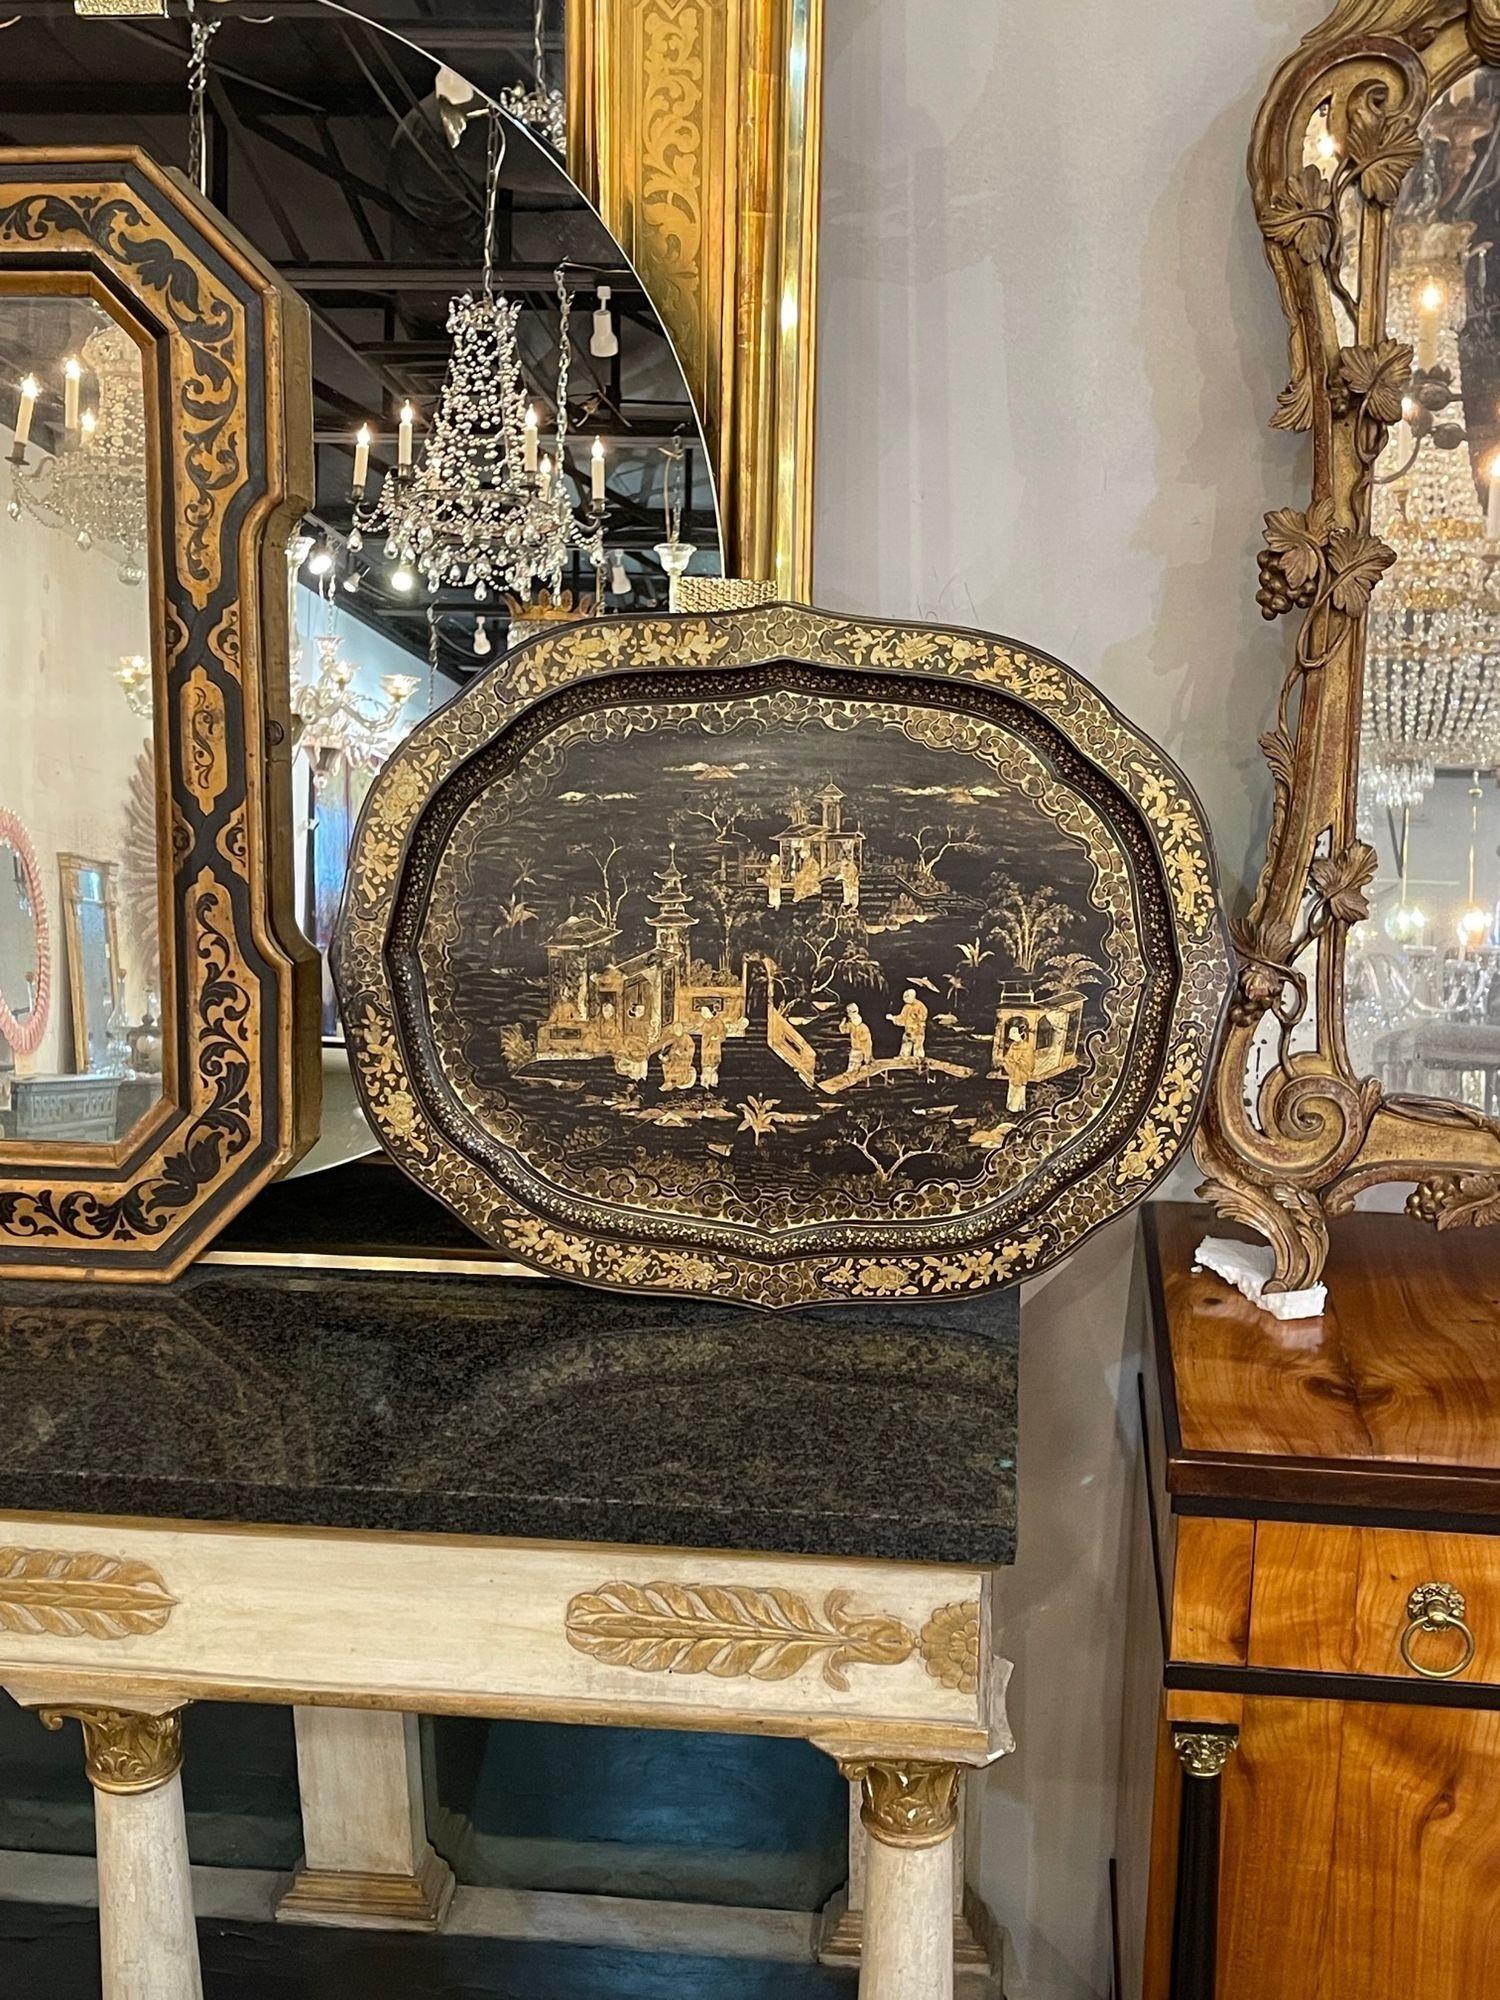 Very nice 19th century English Chinoiserie decorated paper mache tray. Lovely intricate design. A beautiful piece that makes a great accessory!